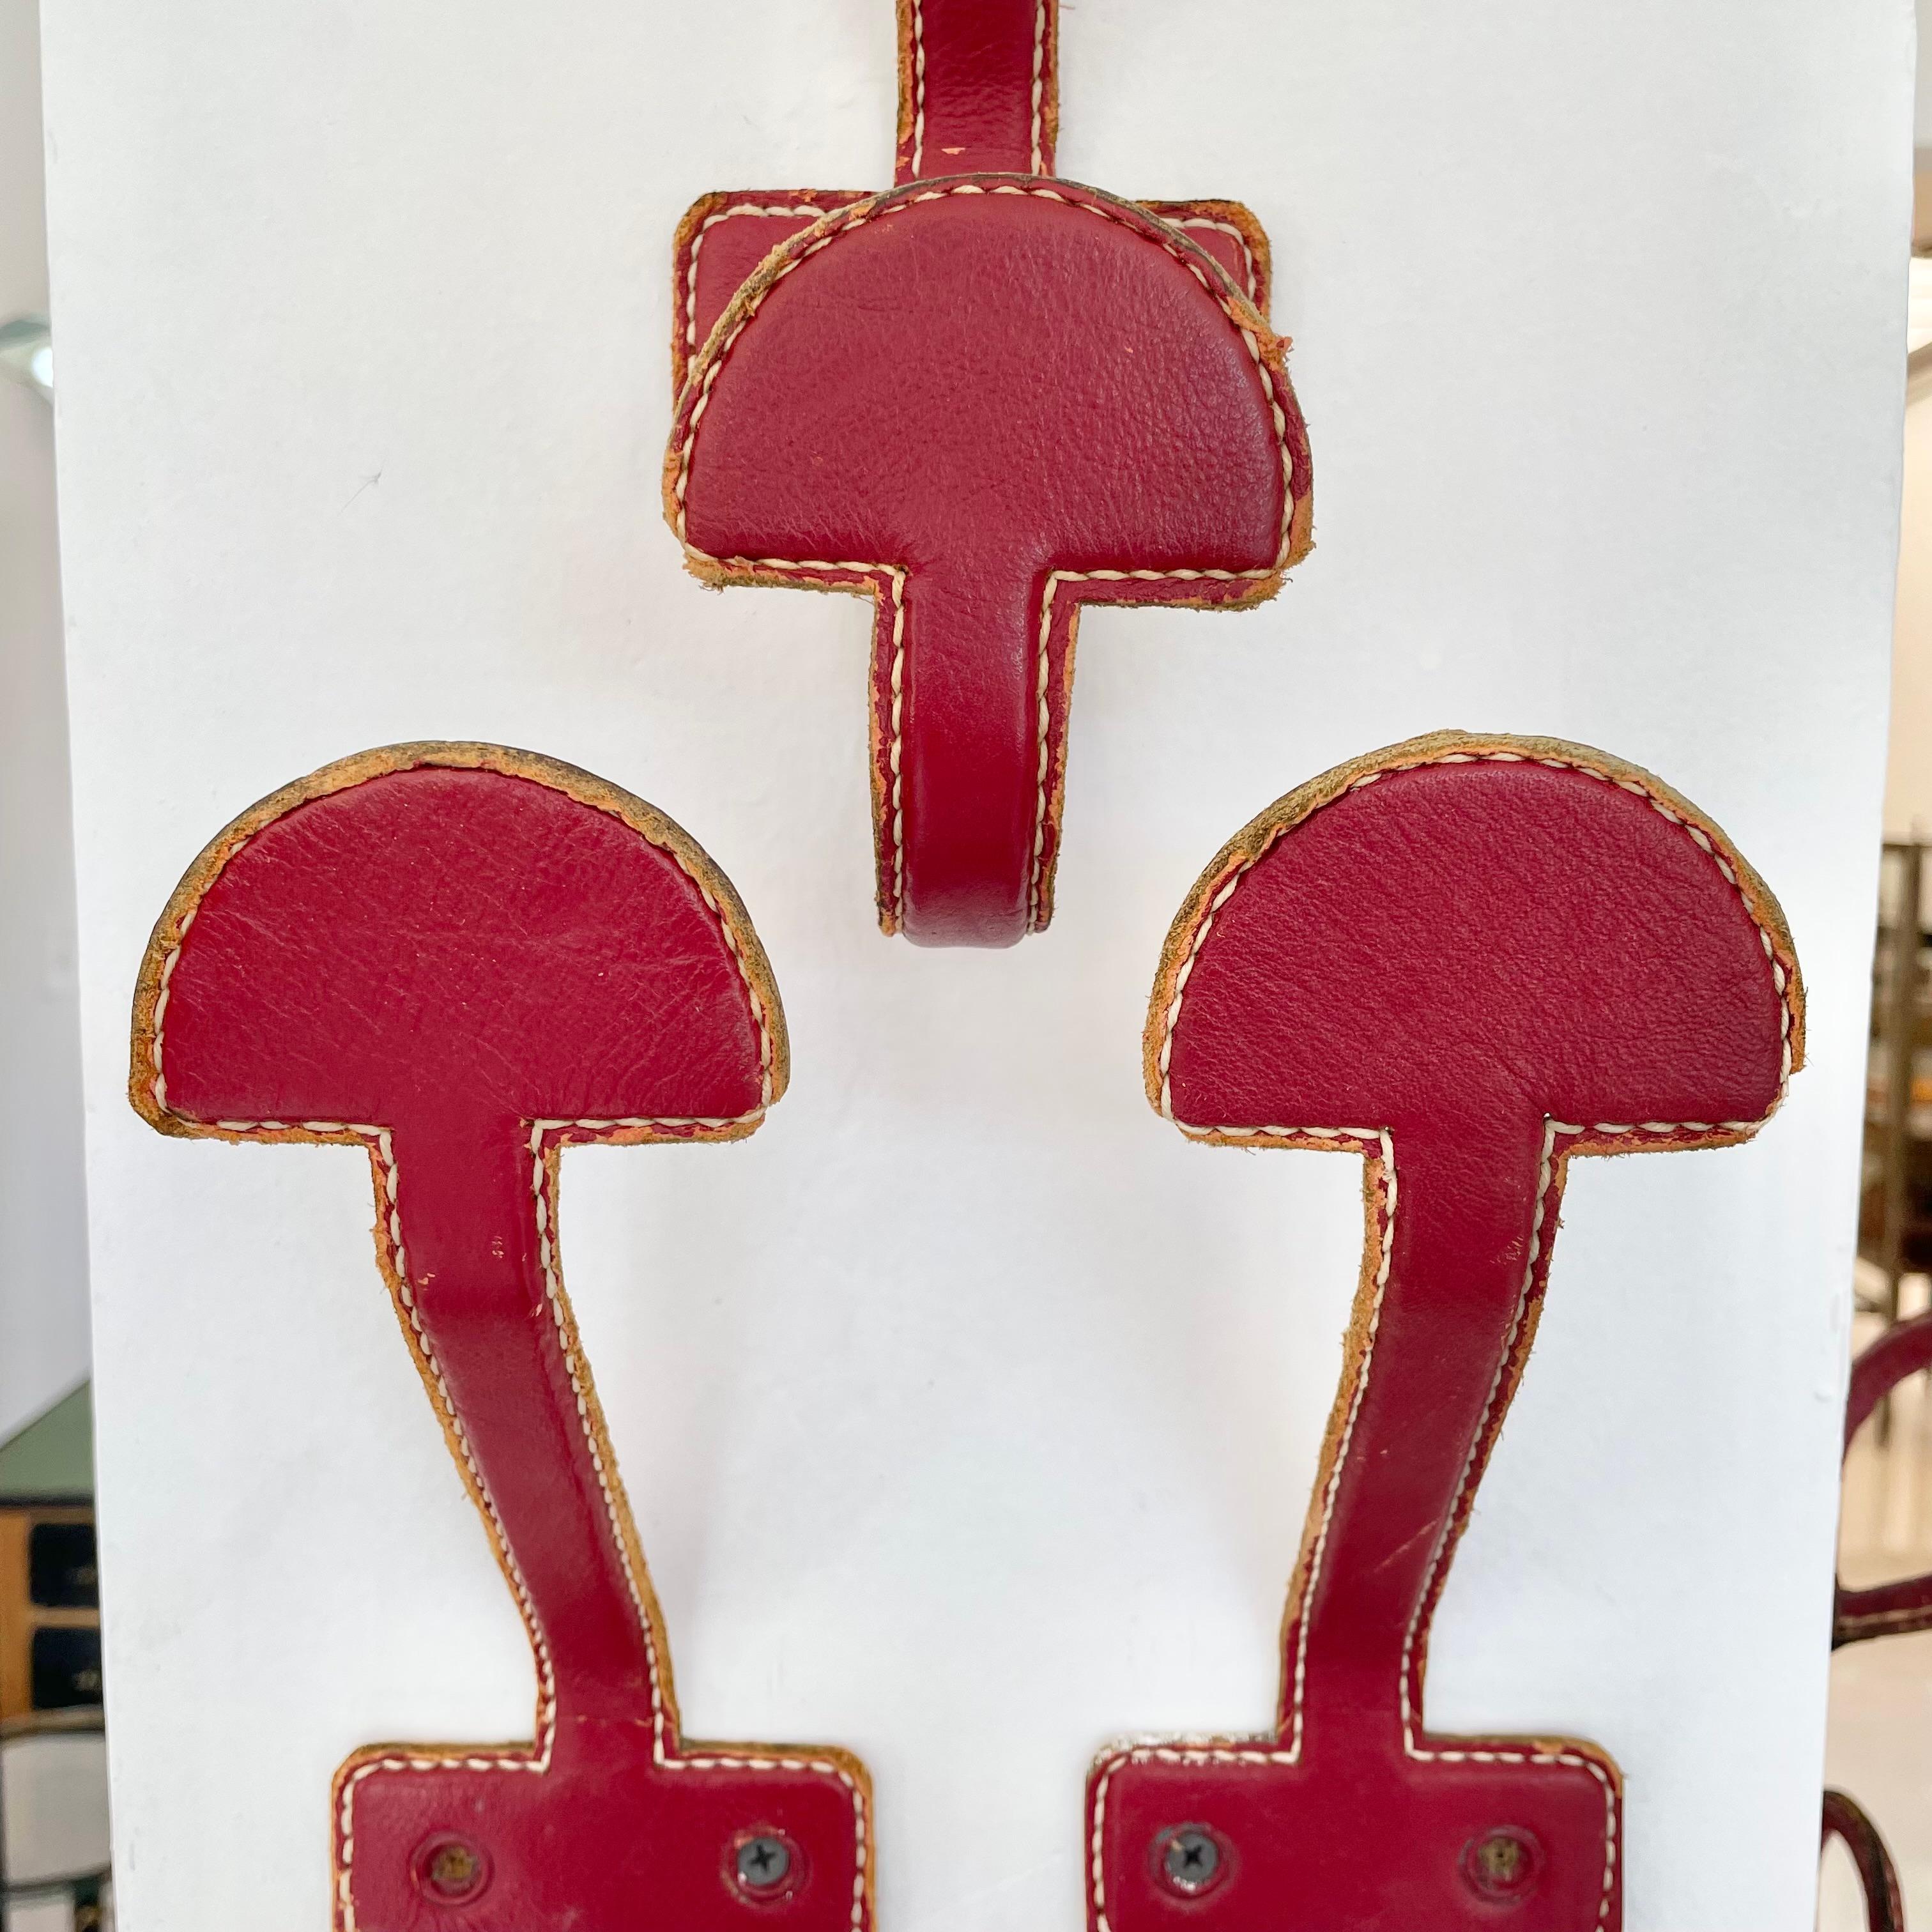 Set of 3 Jacques Adnet Red Leather Coat Hooks, 1950s France For Sale 4